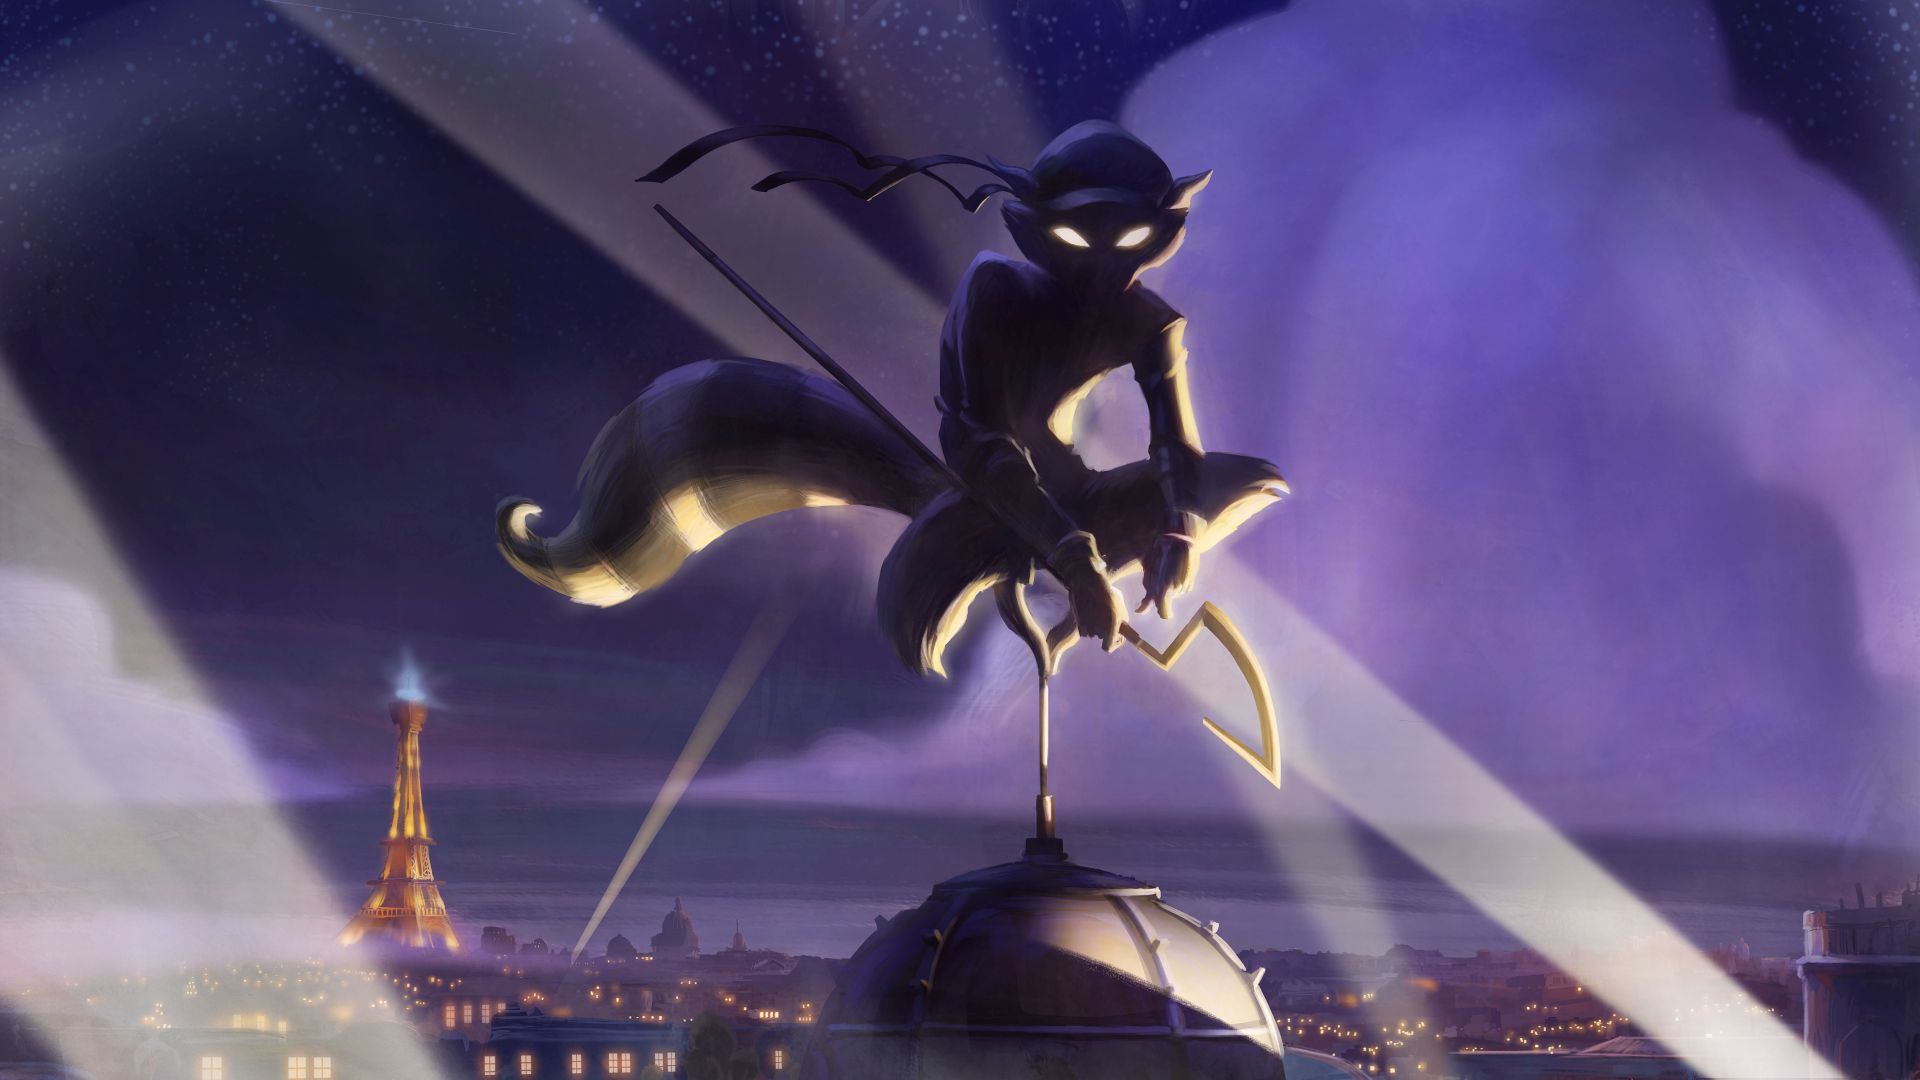 Sly Cooper 5: Which Studios Could be Making the Game?